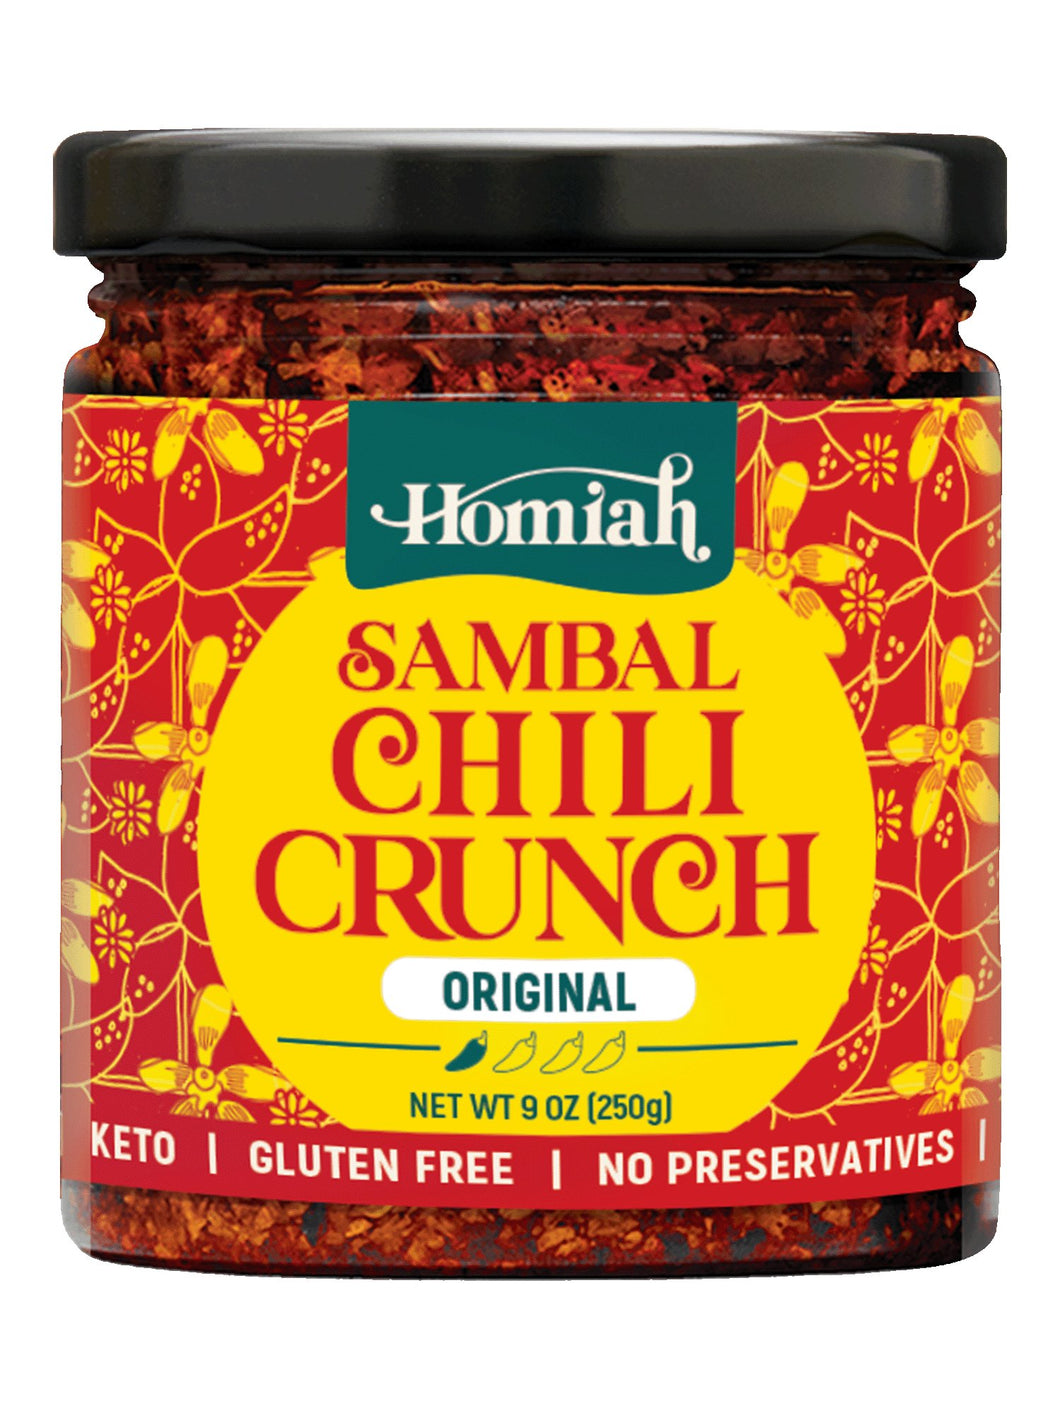 Homiah - Sambal Chili Crunch, Original by Homiah - | Delivery near me in ... Farm2Me #url#